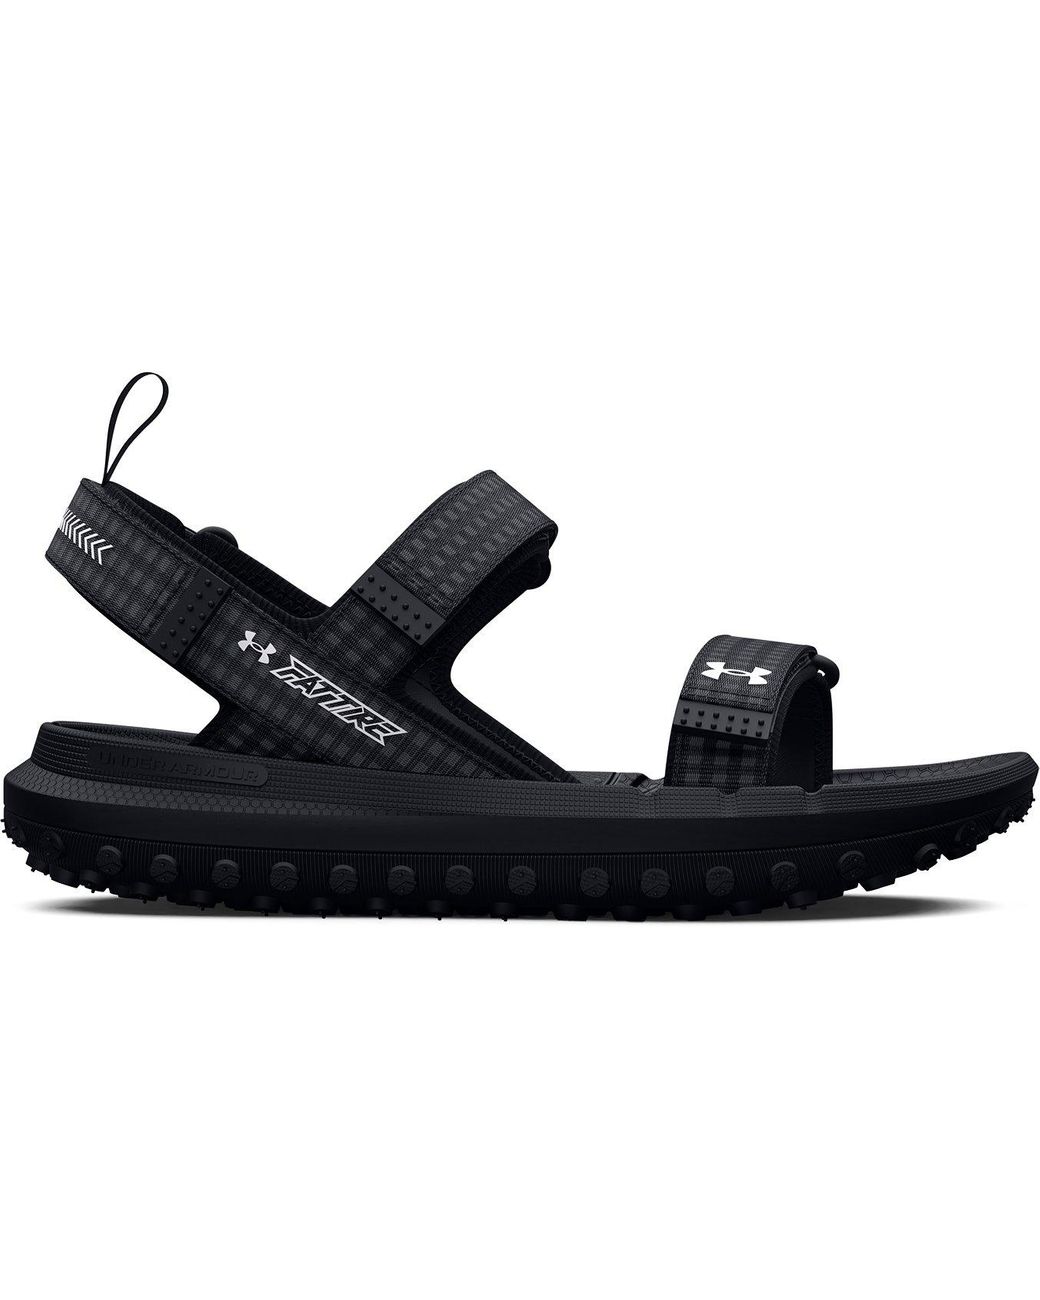 Under Armour Ua Fat Tire Hiking Sandals in Black | Lyst